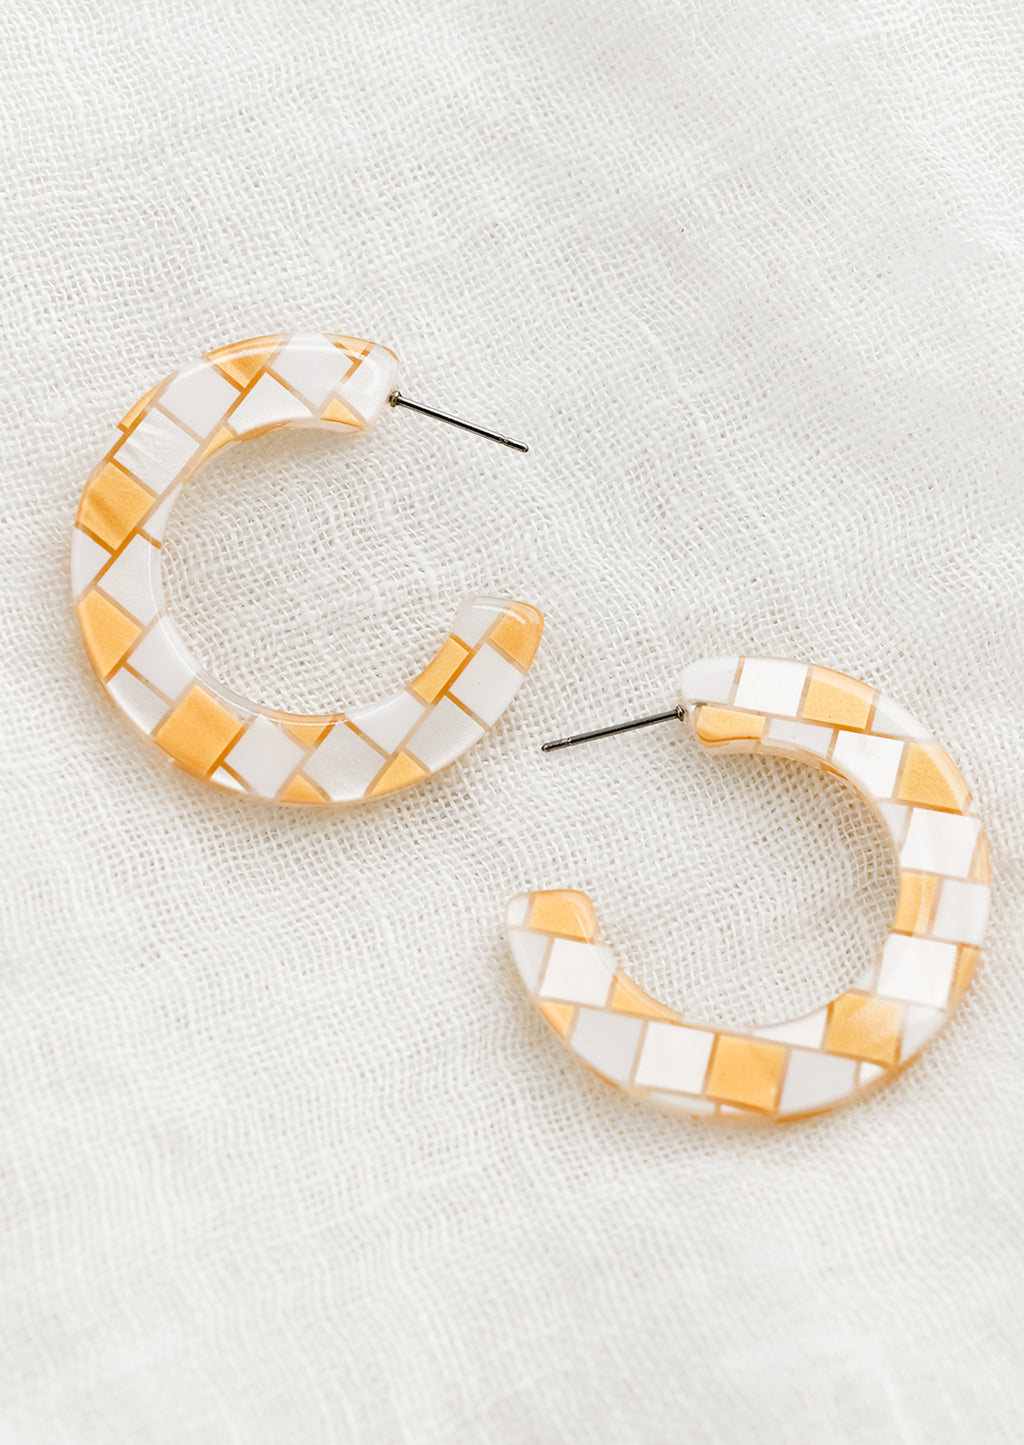 Gold: A pair of checkered earrings in gold.